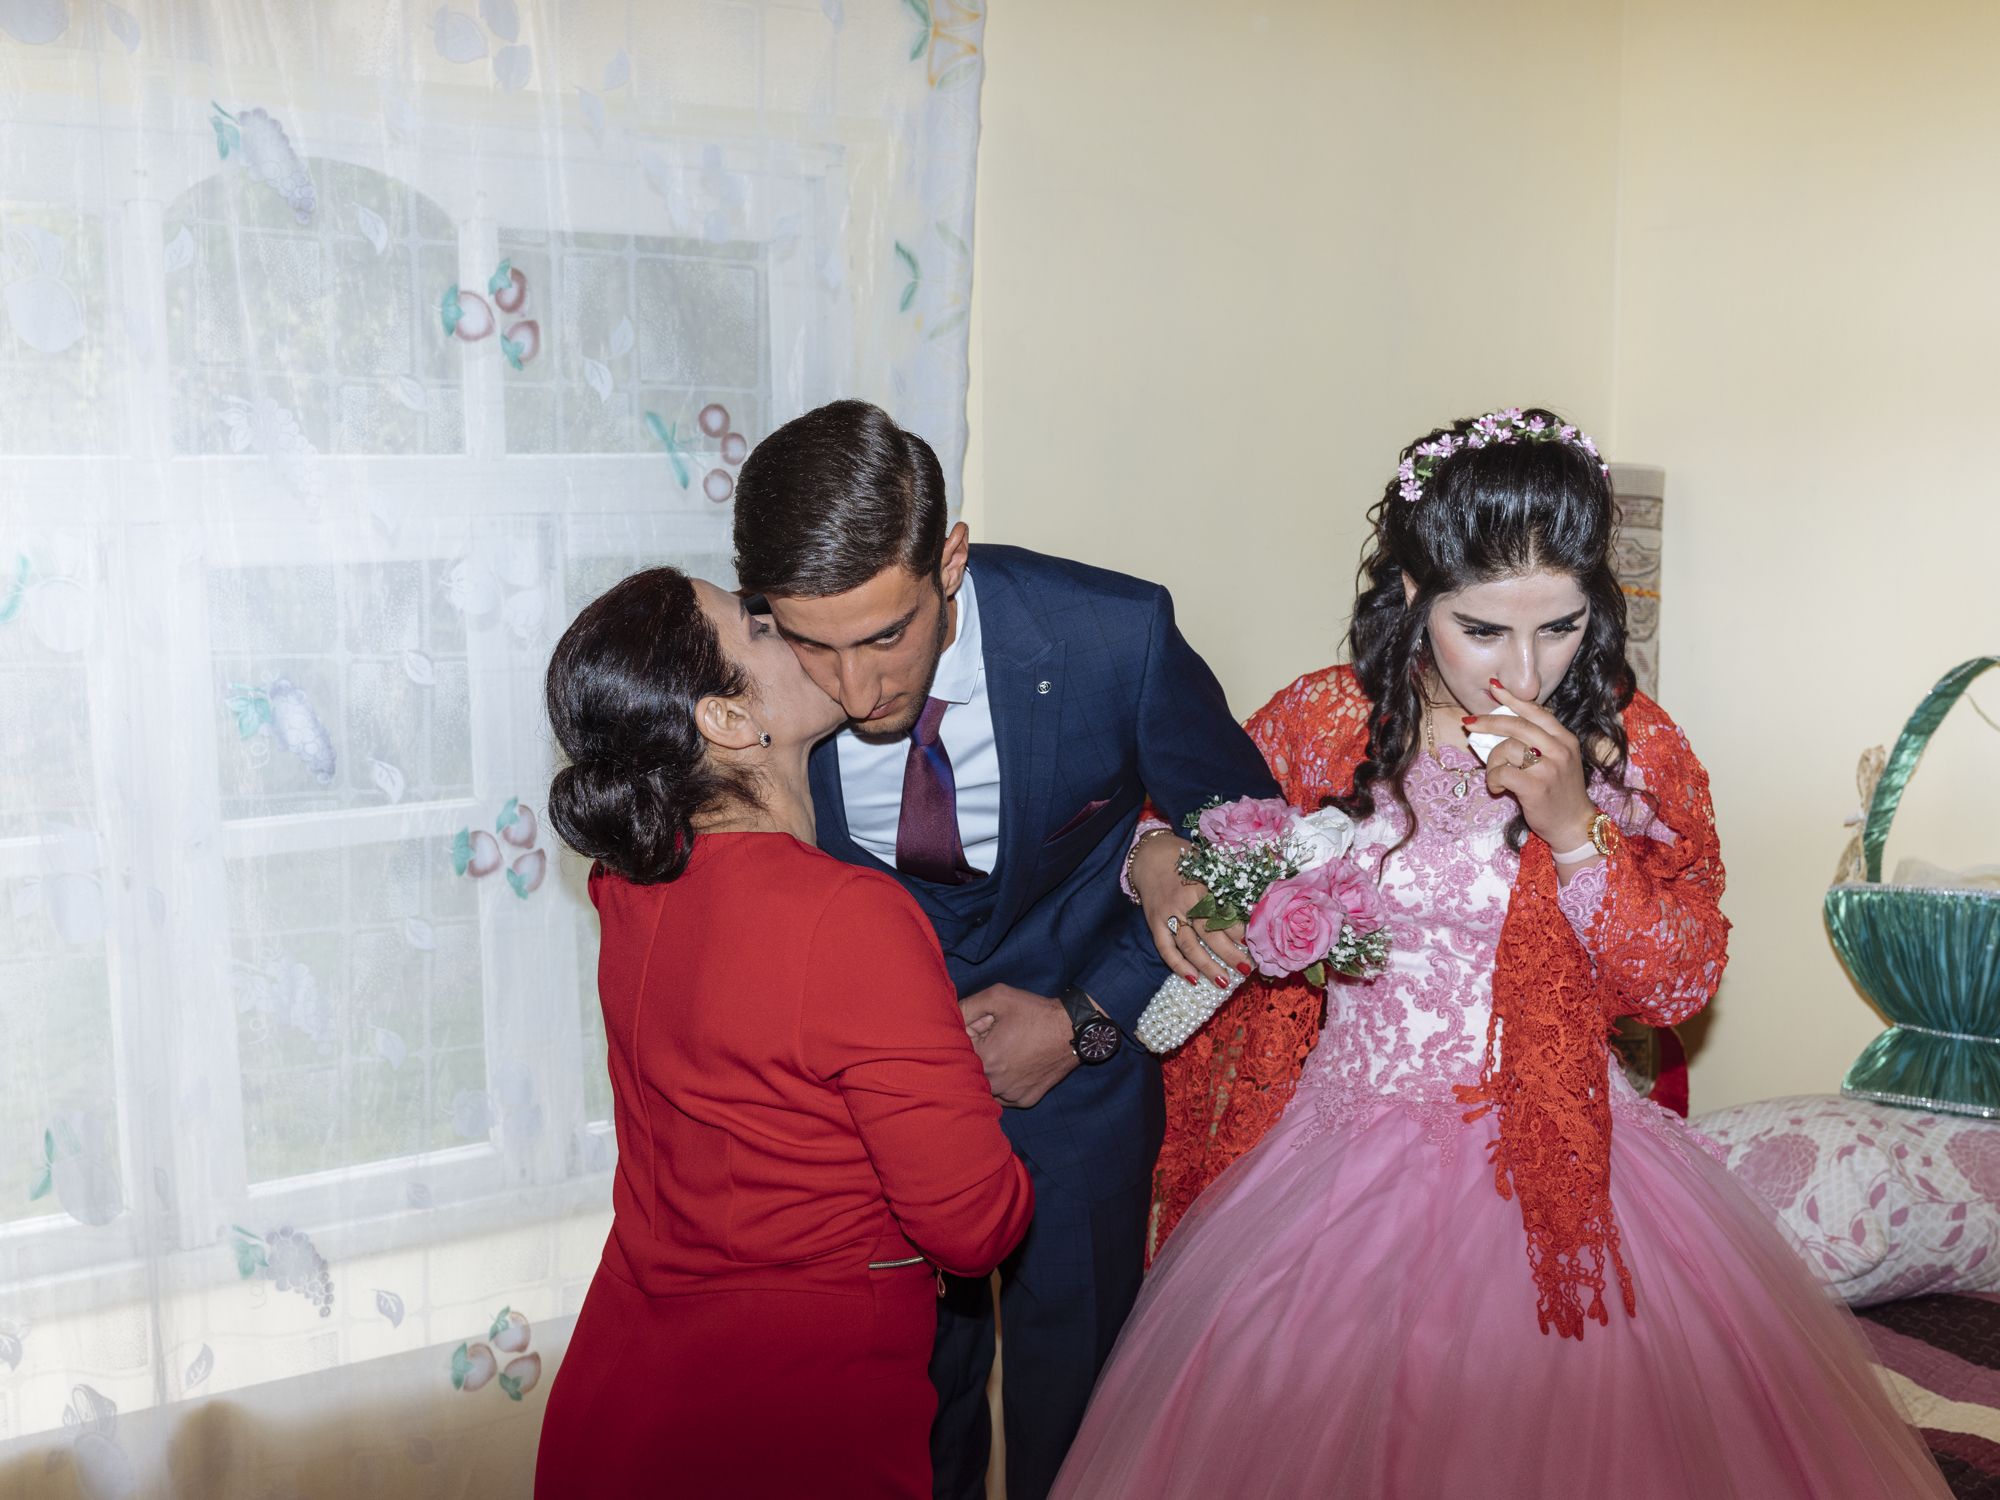 Saray, 48, kisses Muhammed Guliyeva, 20, now the husband of her daughter Terane Sahverdiyeva, 17, before the wedding ceremony in Zarikumecu village. 

In much of Azerbaijan, to be a woman is above all to be a wife and a mother. The priority for women in rural areas is to marry young, because otherwise they will have no alternative but to stay with their parents. Image by Emin Ozmen / Magnum Photos. Azerbaijan, 2018.